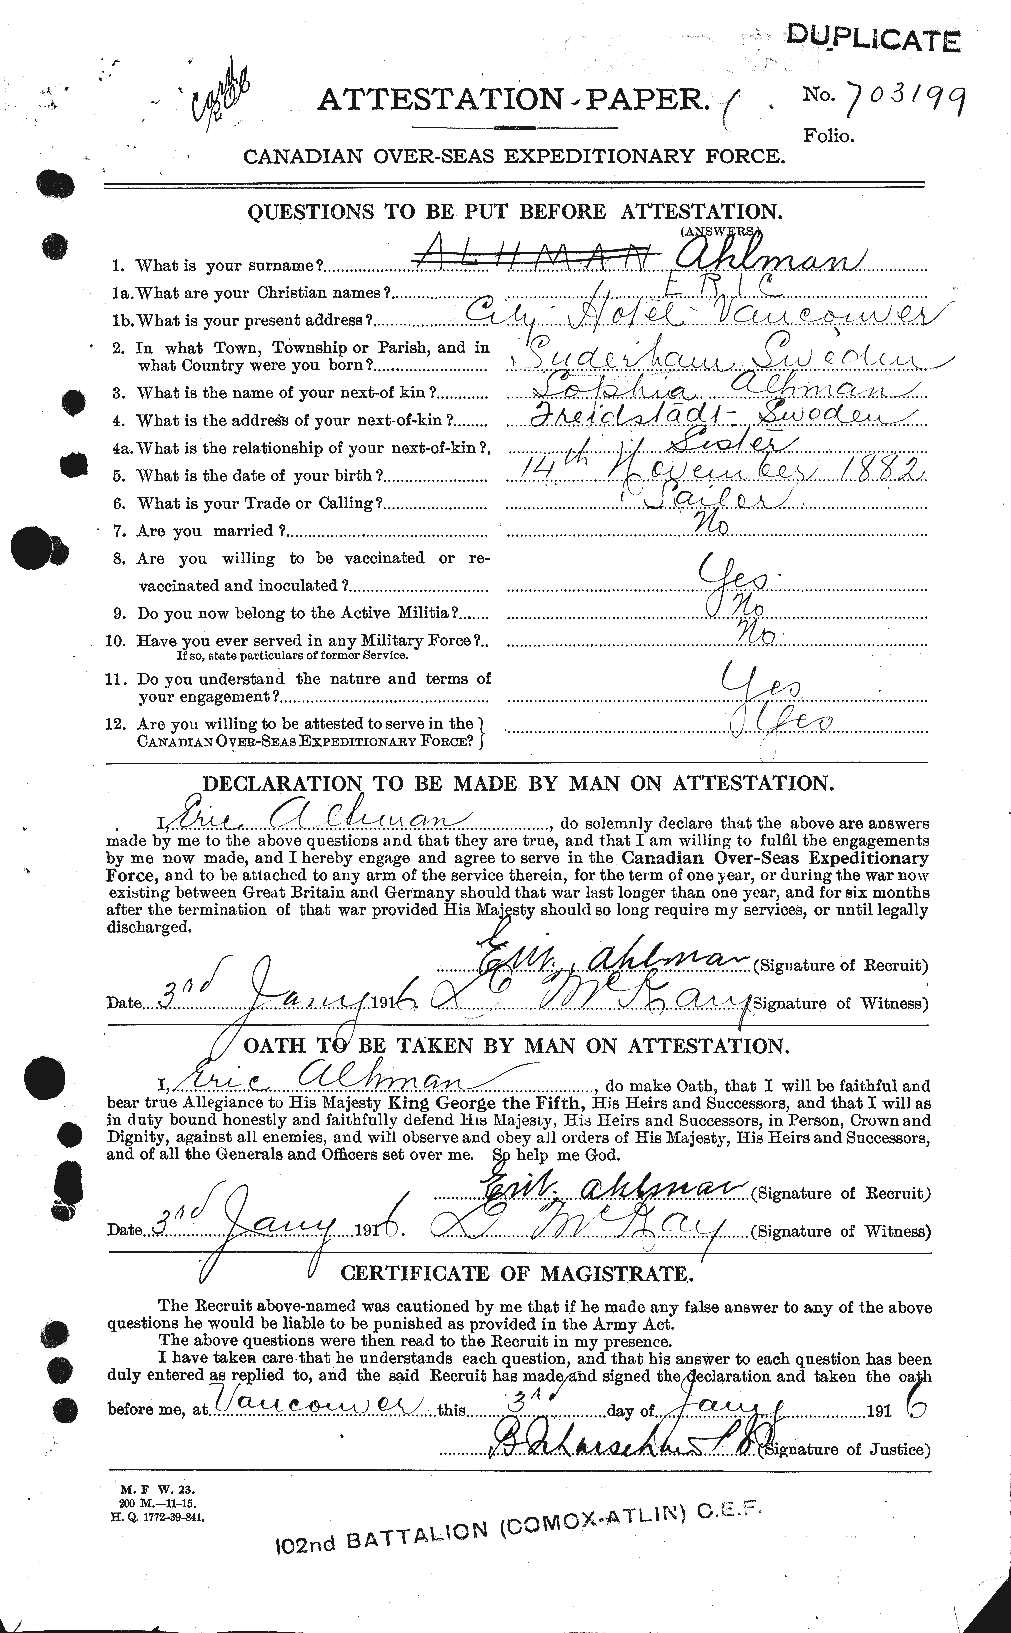 Personnel Records of the First World War - CEF 203905a